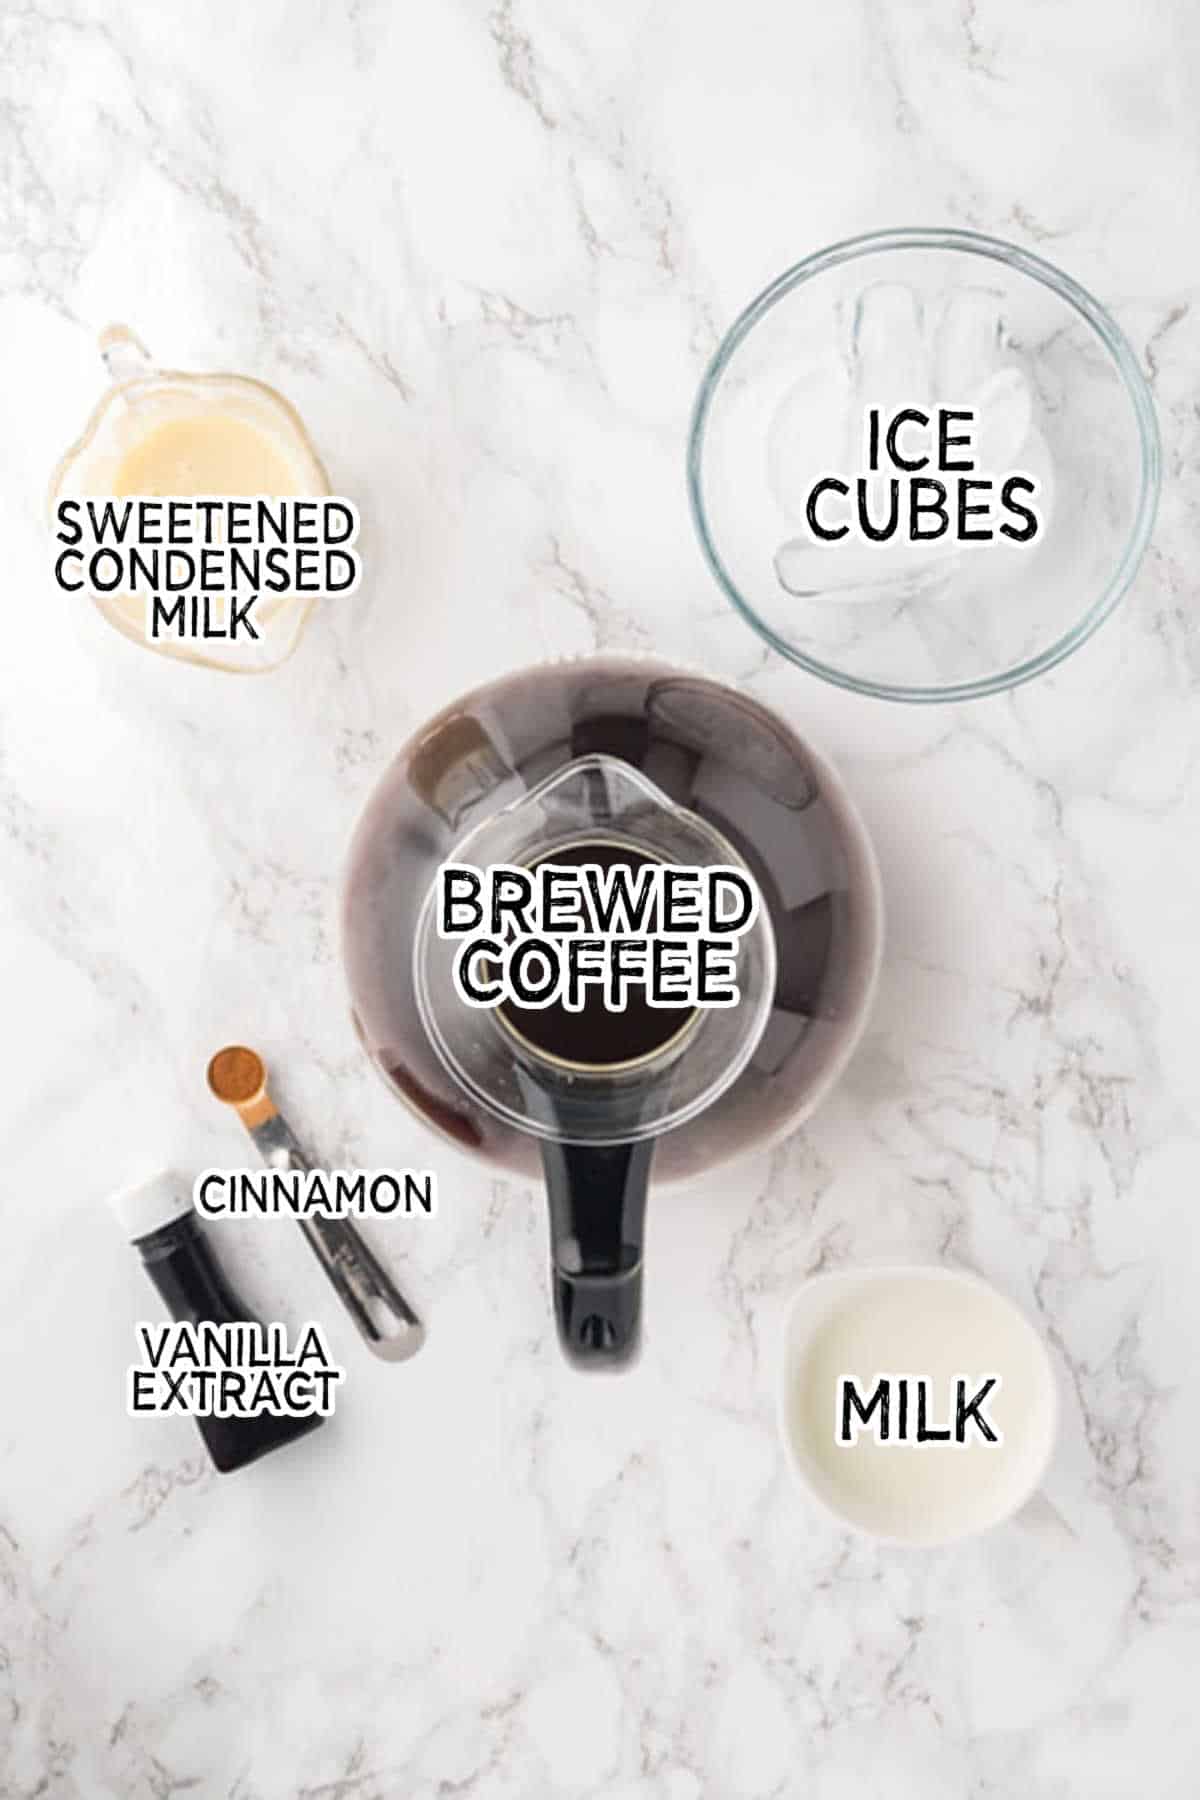 Ingredients to make iced coffee.